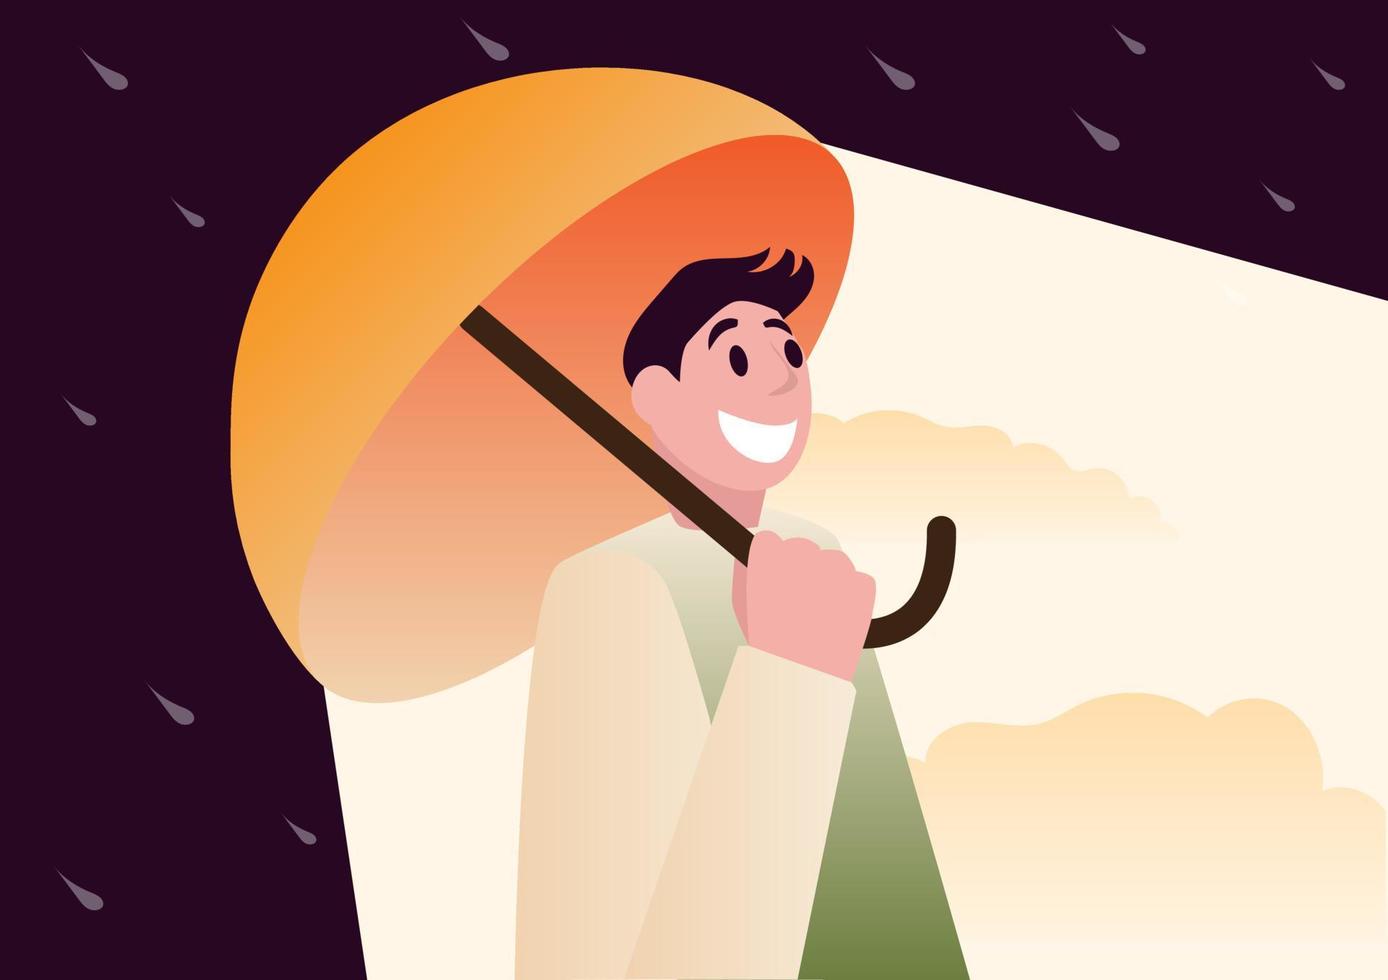 male character walking through heavy rain But inside his umbrella was bright and bright. positive worldview vector